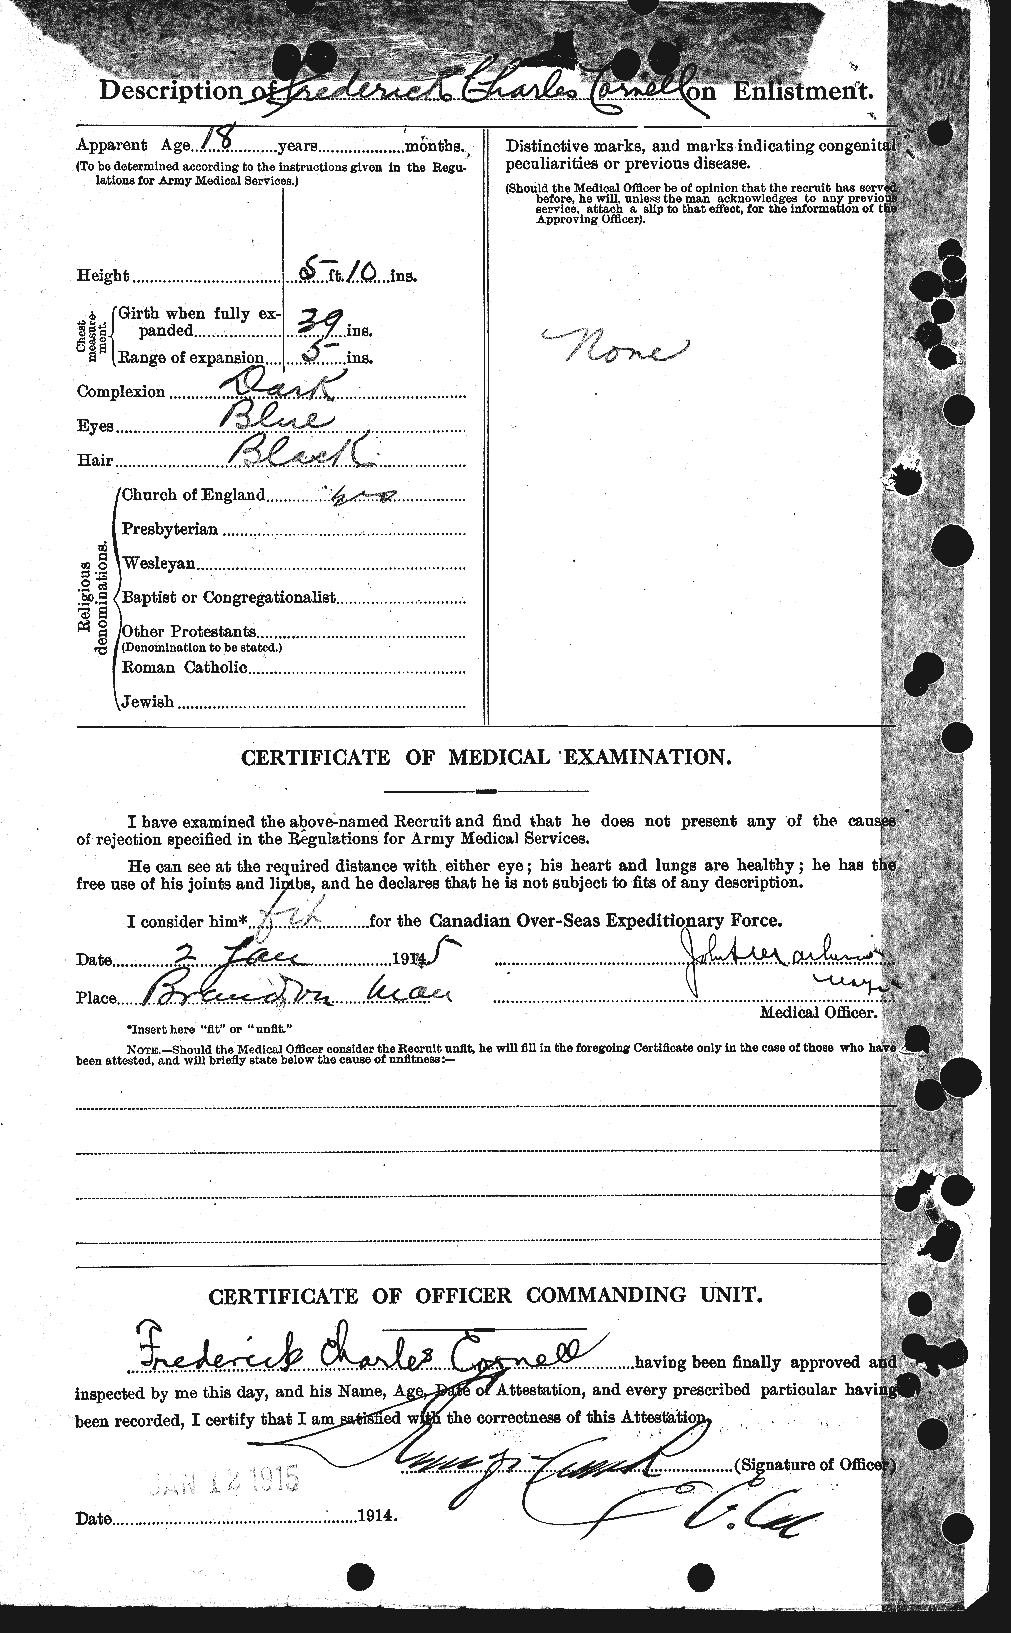 Personnel Records of the First World War - CEF 056621b